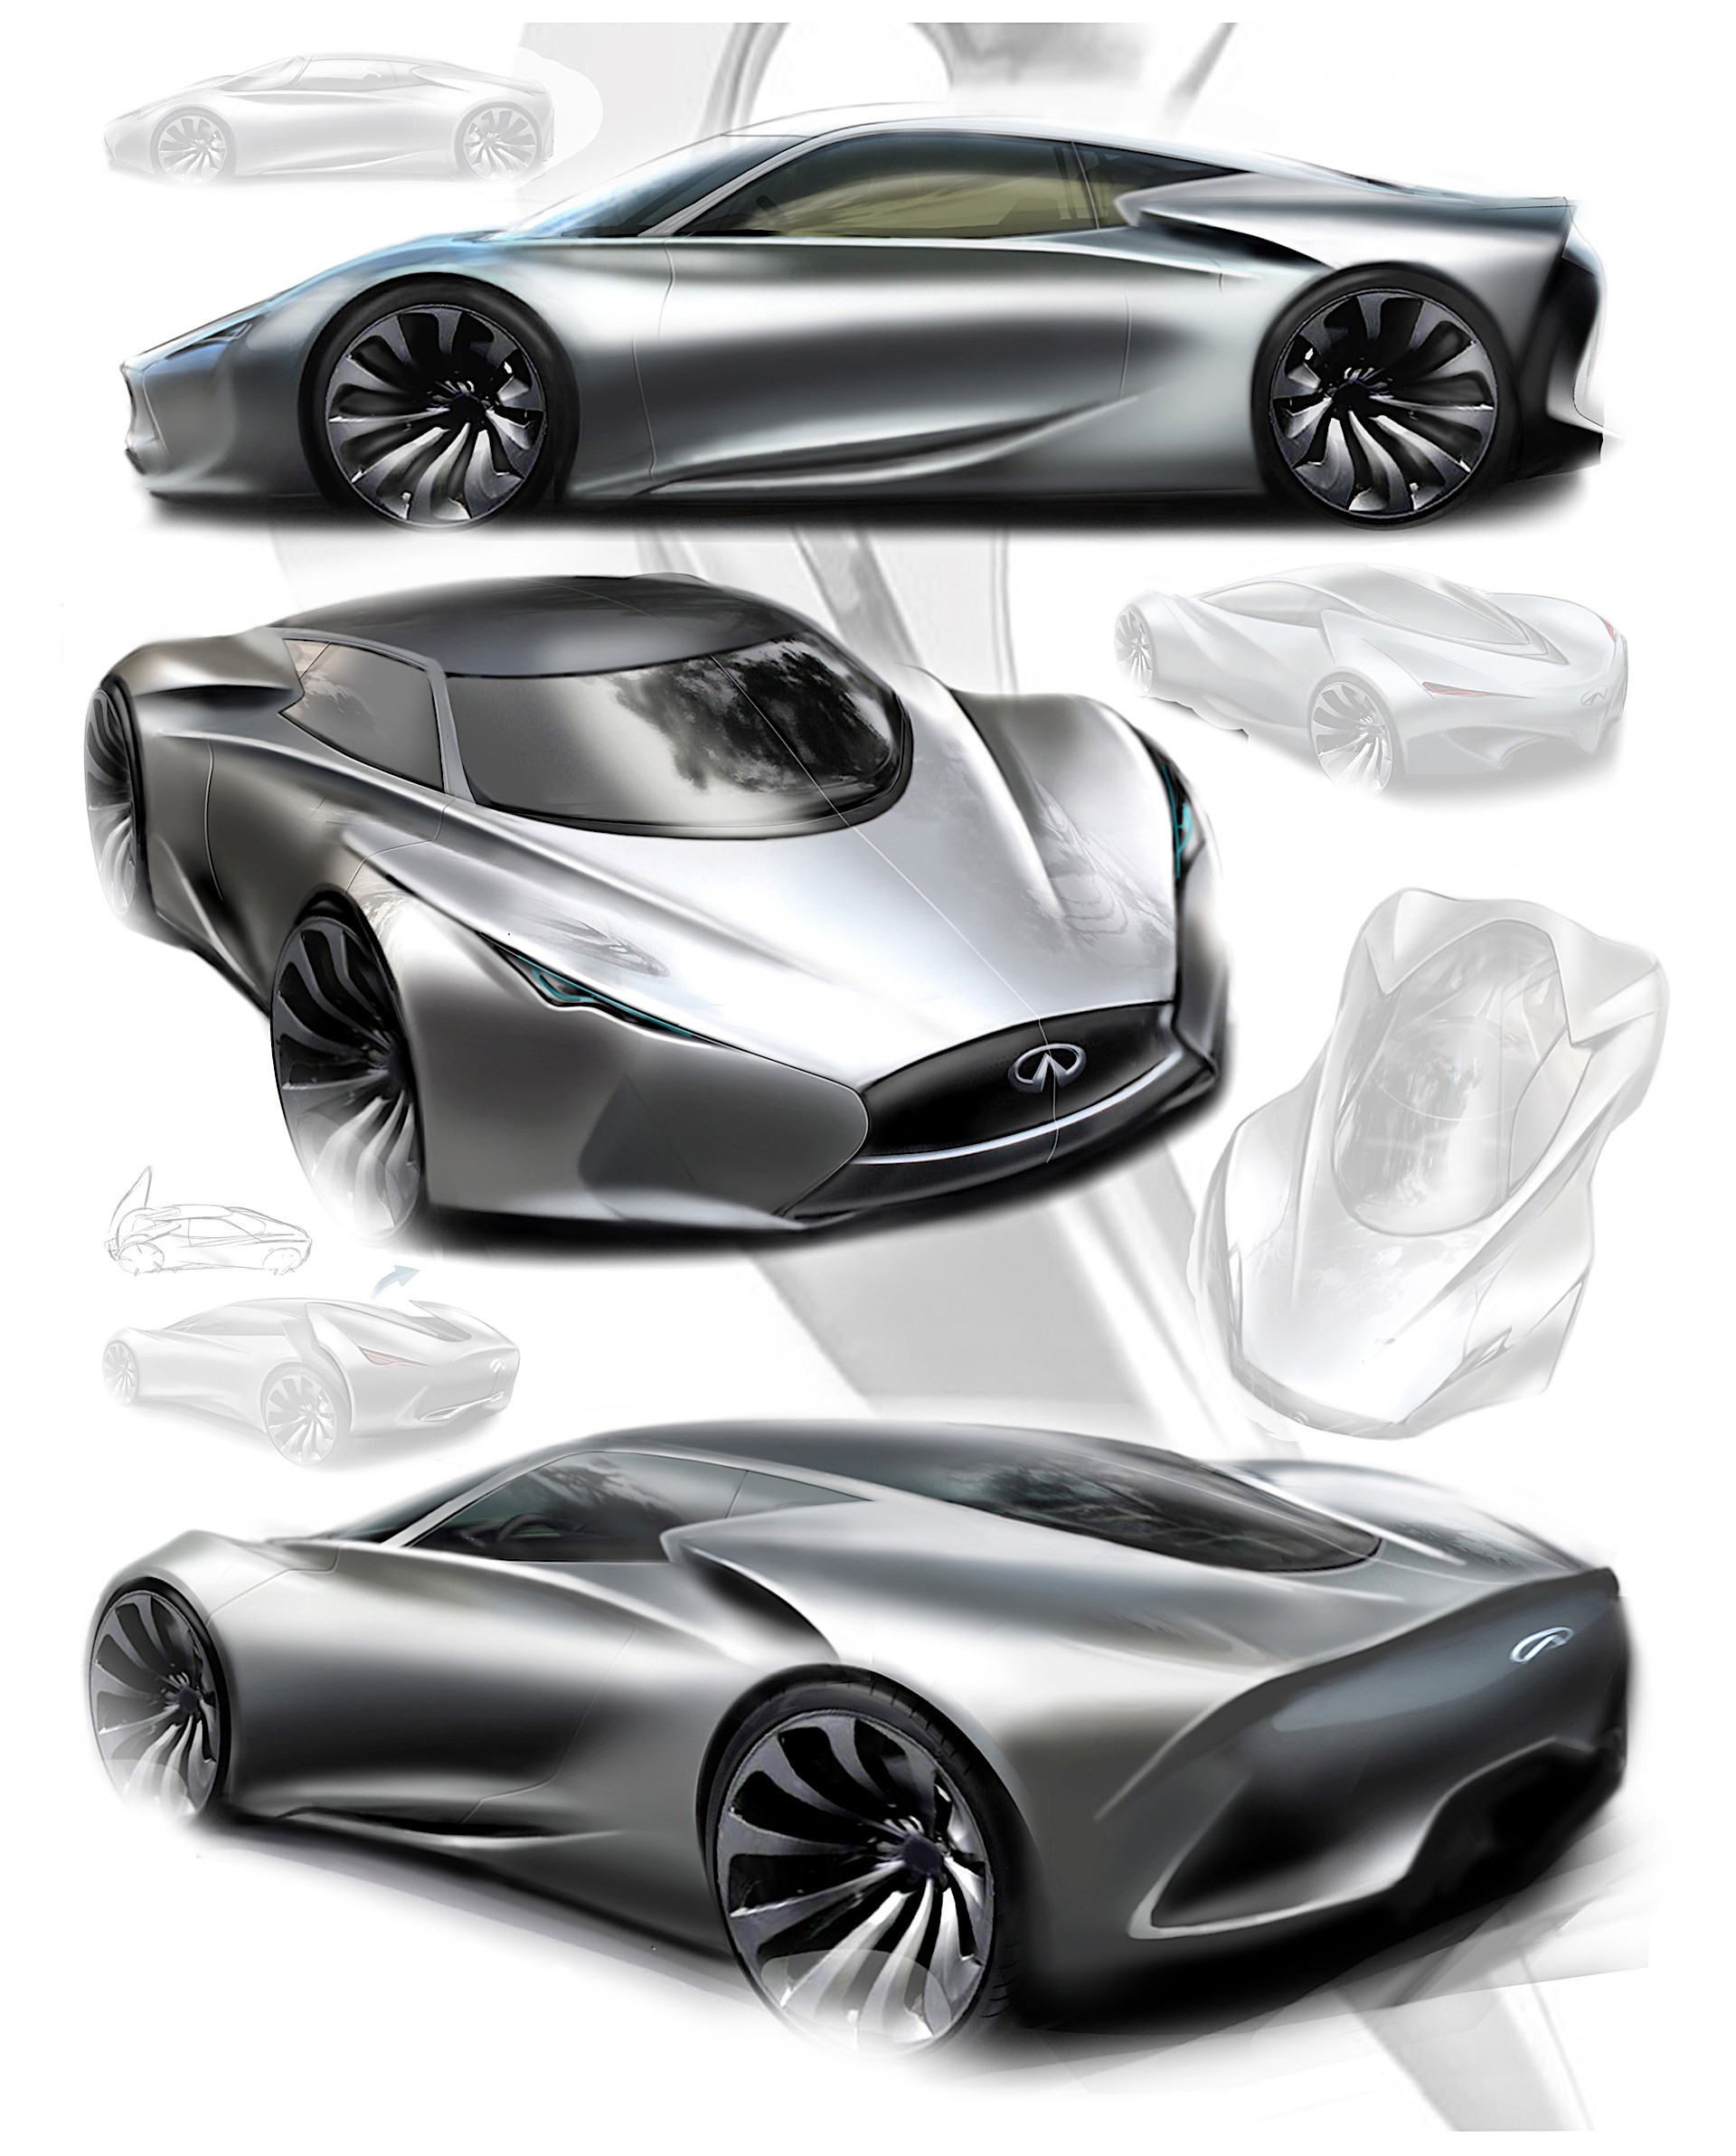 Infiniti confirms electric sports car for 2020